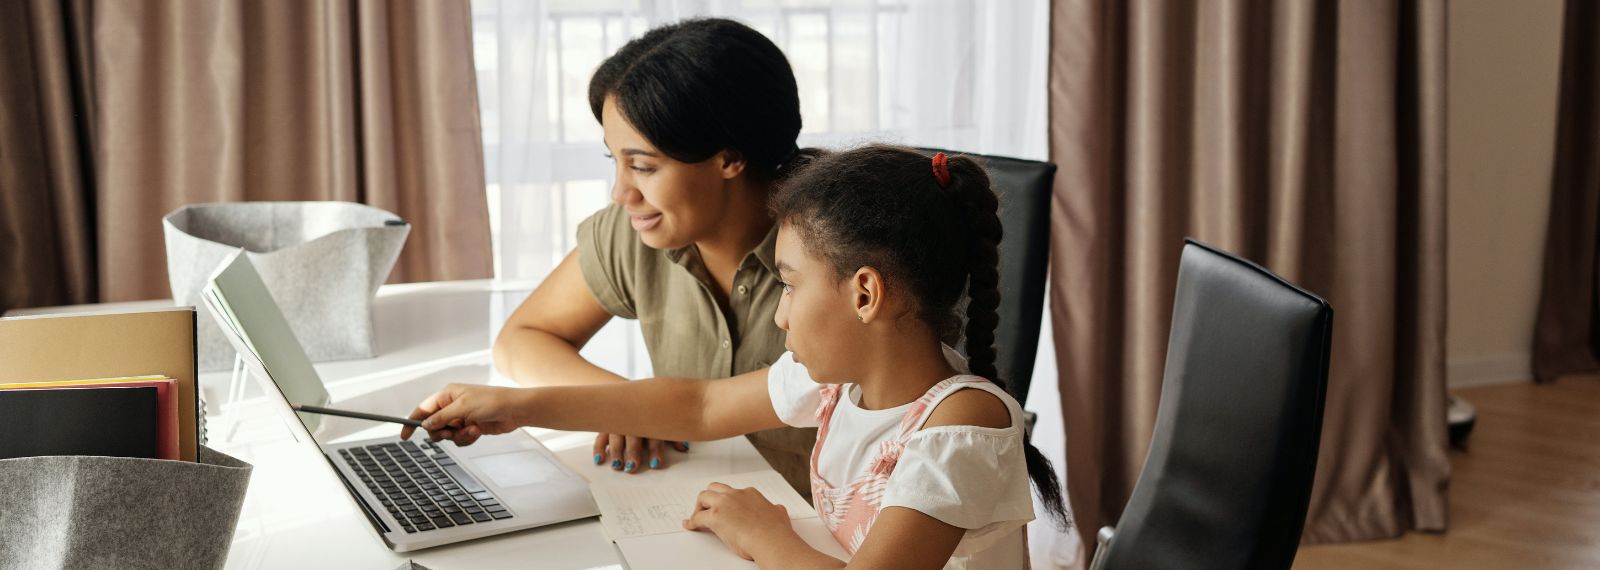 A mother and daughter sitting together at a table with a laptop. The daughter is pointing at the laptop screen.